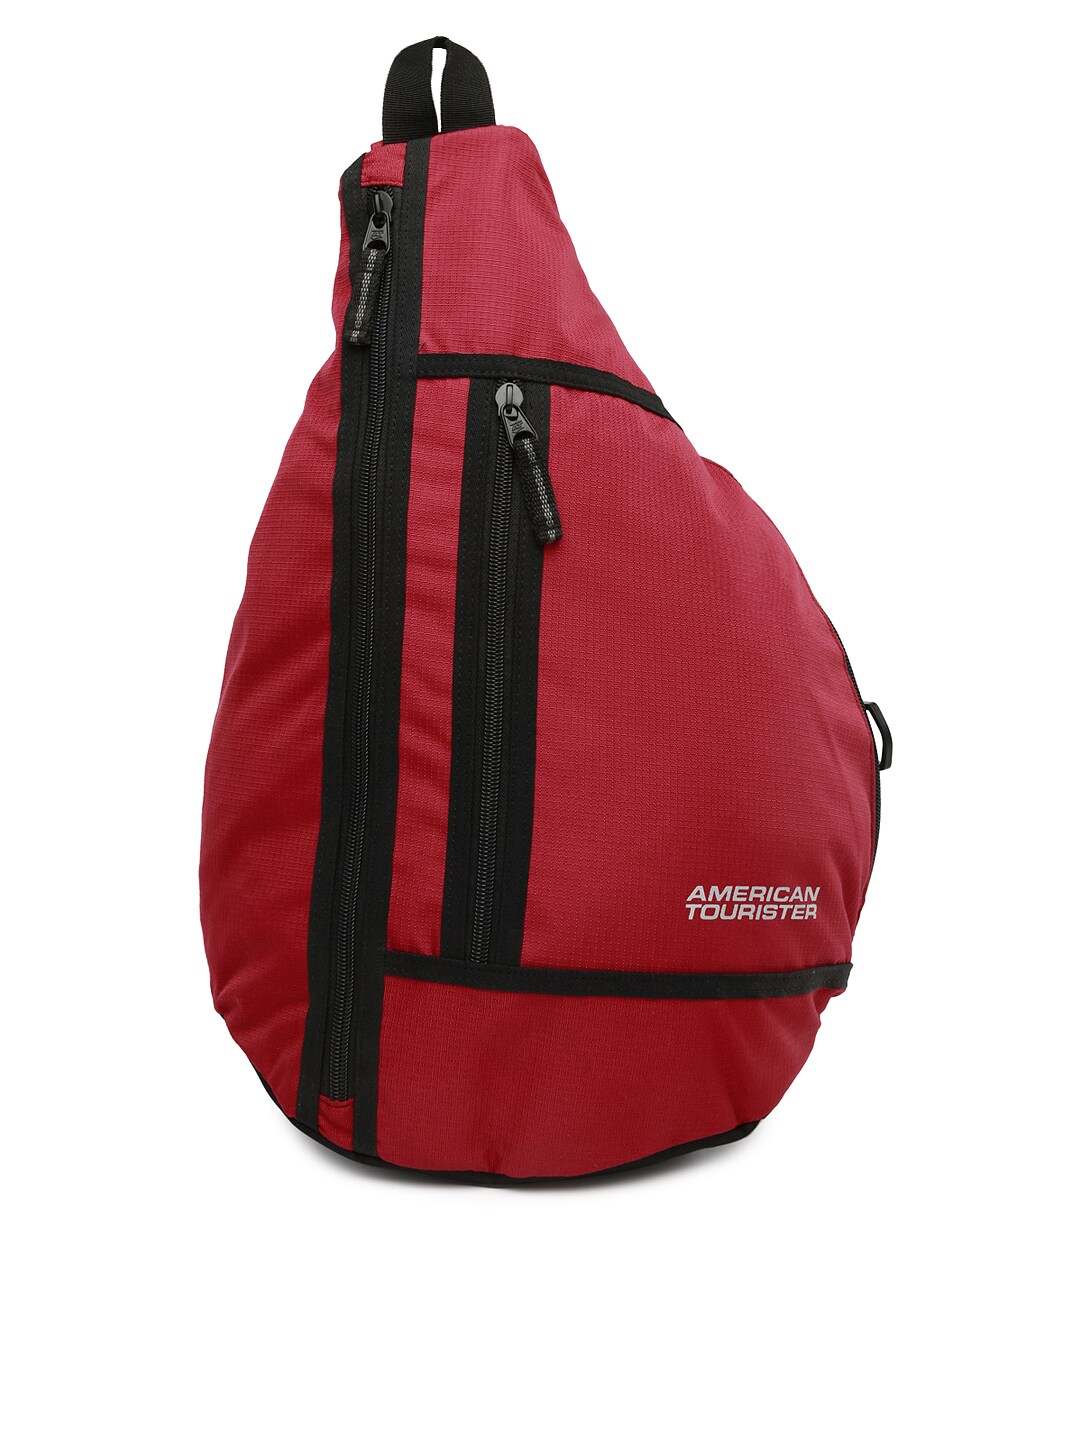 American Tourister Unisex Red & Black Backpack